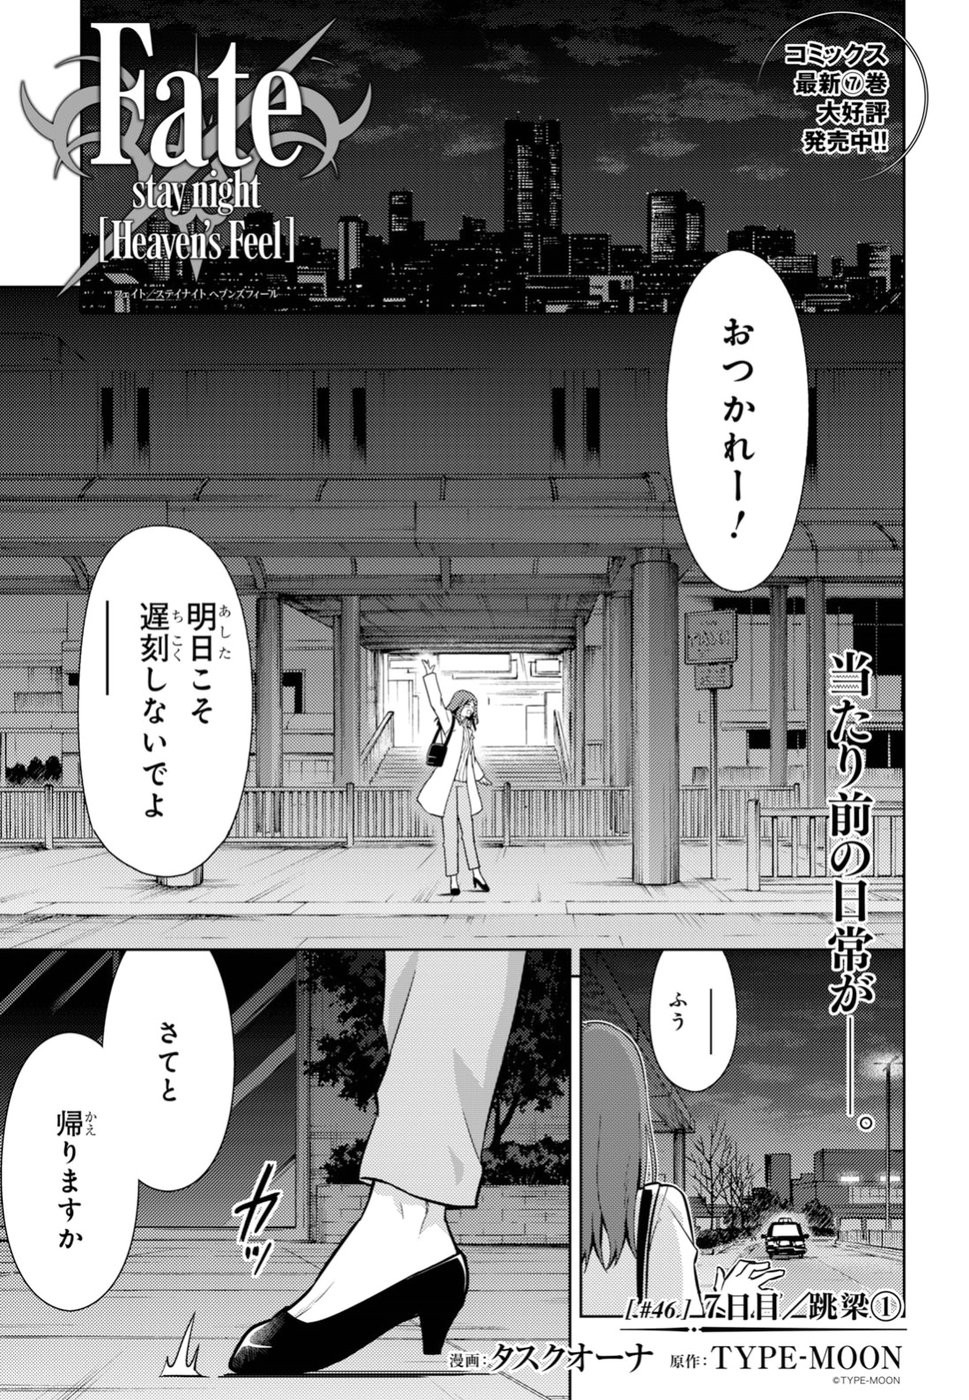 Fate/Stay night Heaven's Feel - Chapter 46 - Page 1